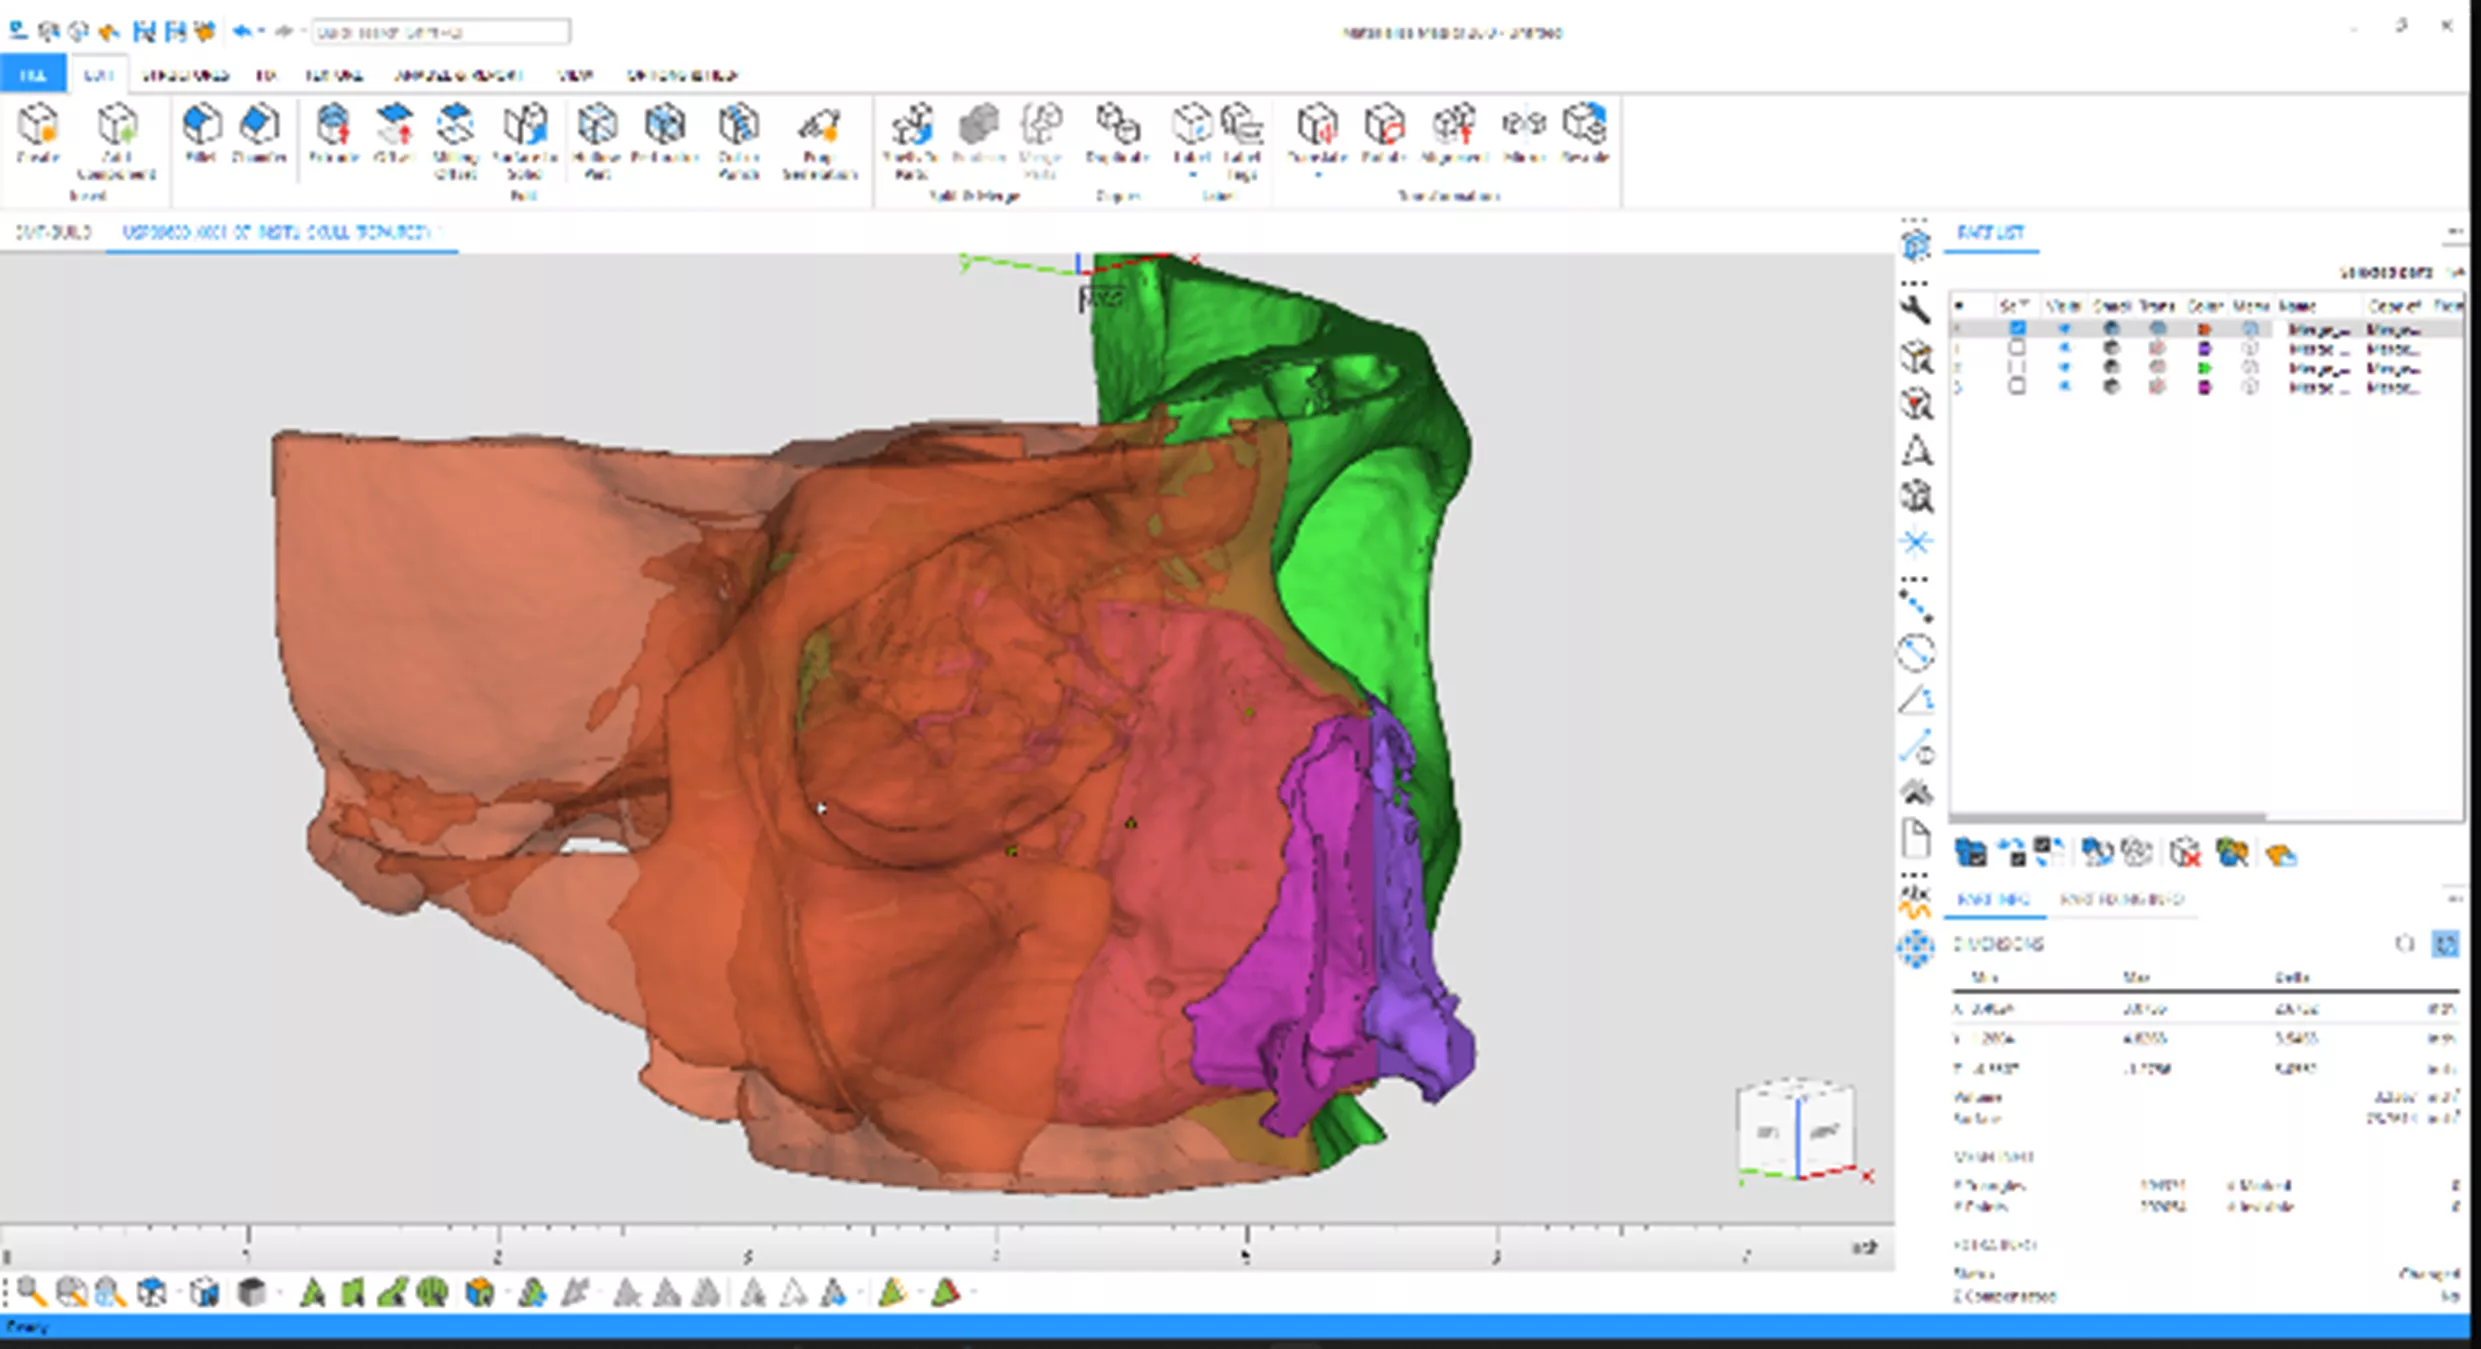 Materialise Magics Software Used for 3D Printing in Healthcare Surgical Applications